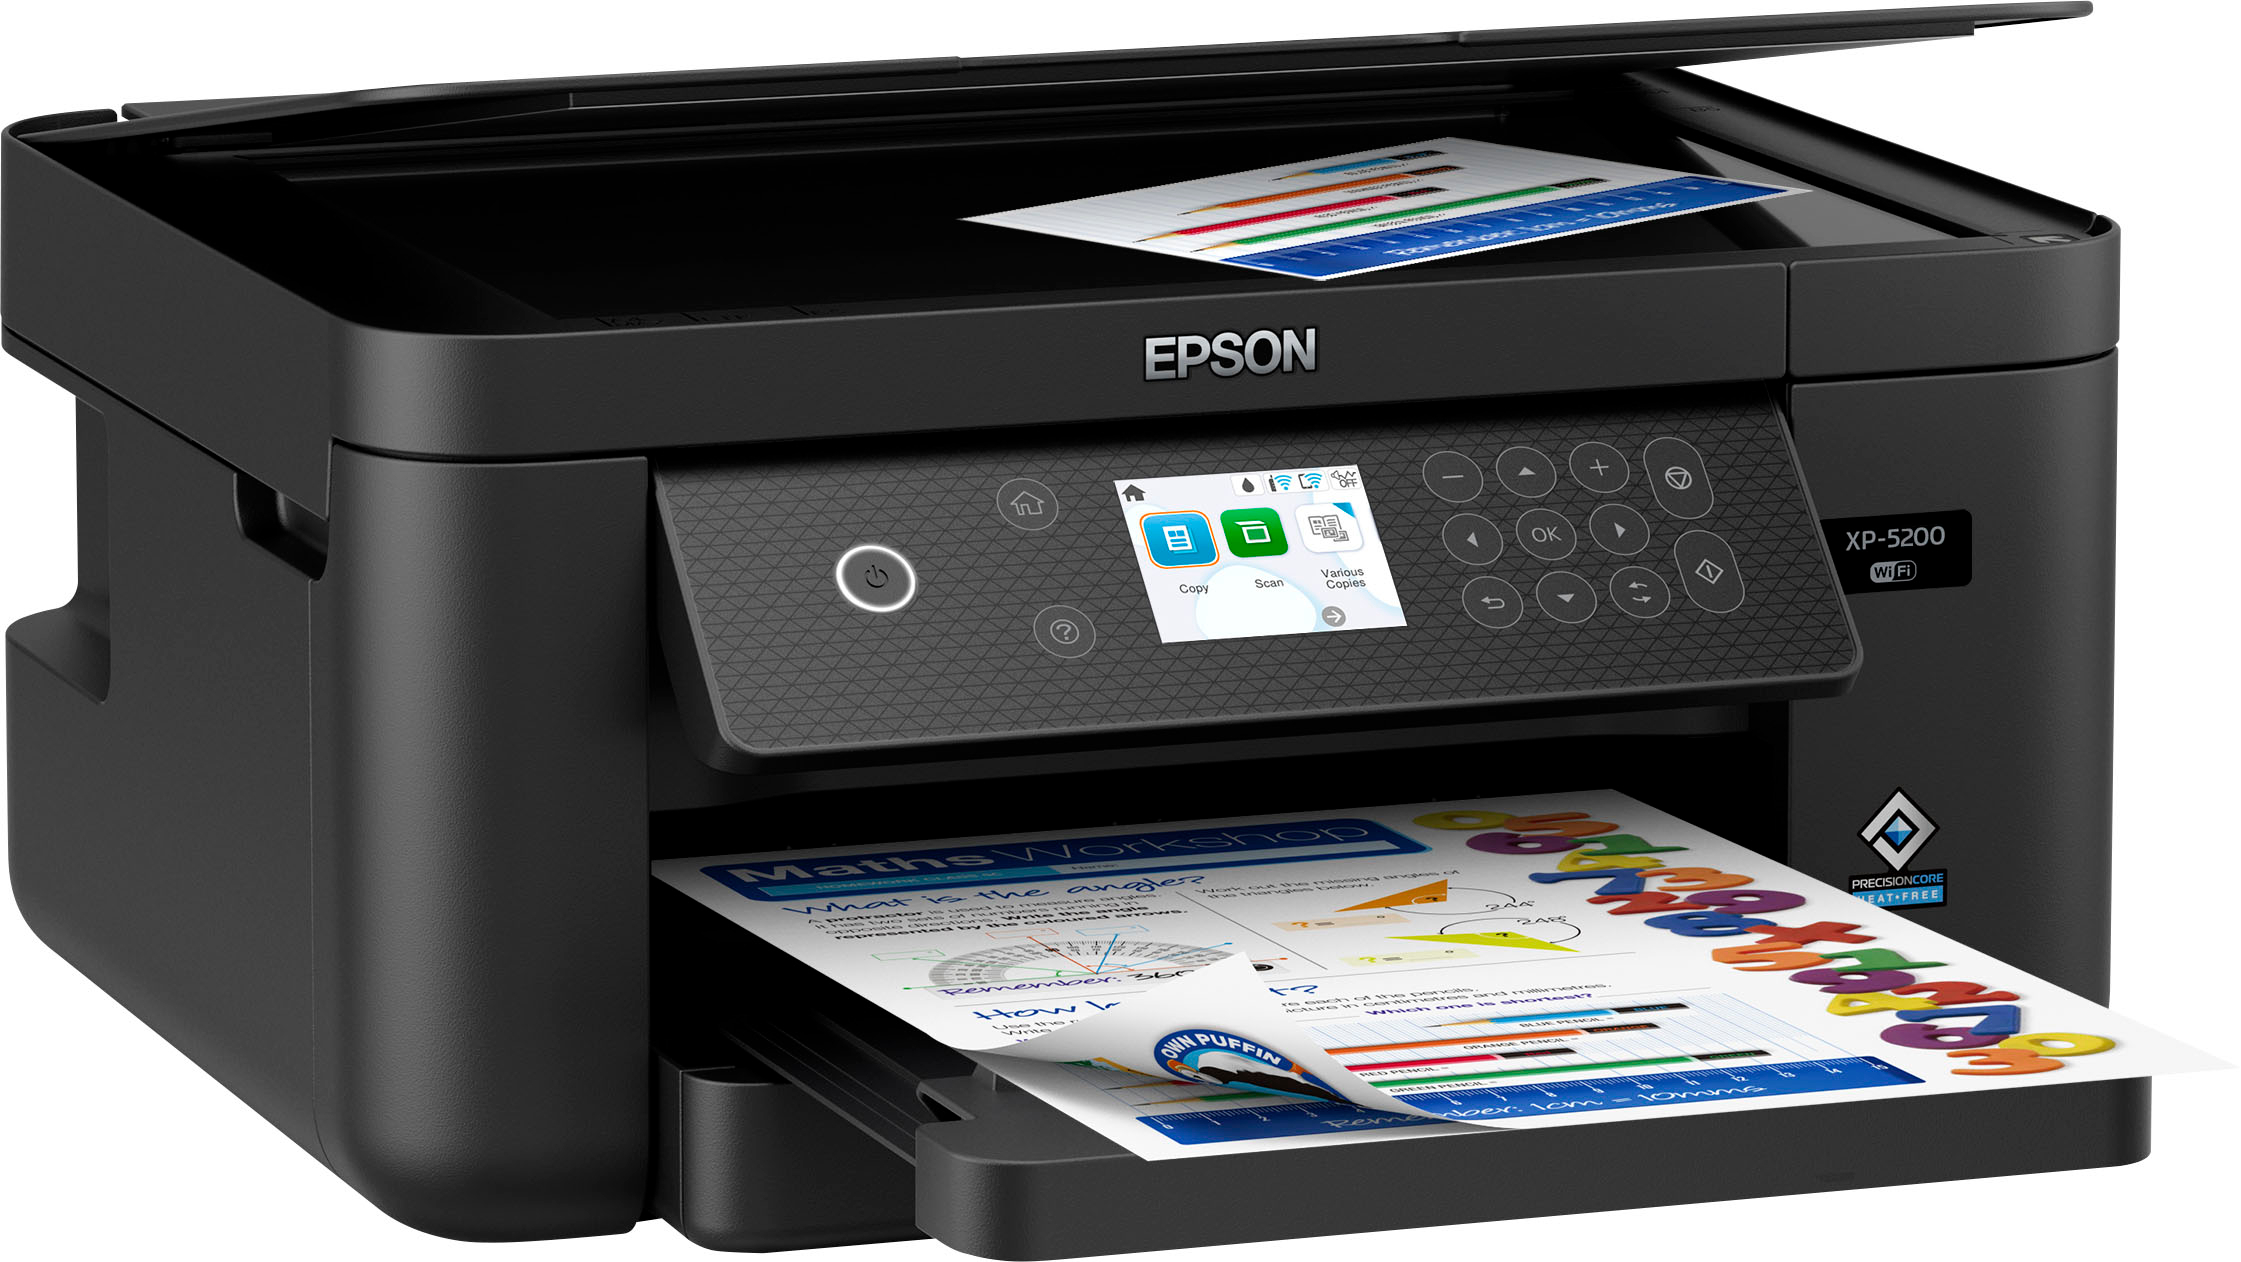 Best Printer XP-5200 Expression C11CK61201 Epson Buy - Black Home Inkjet All-in-One